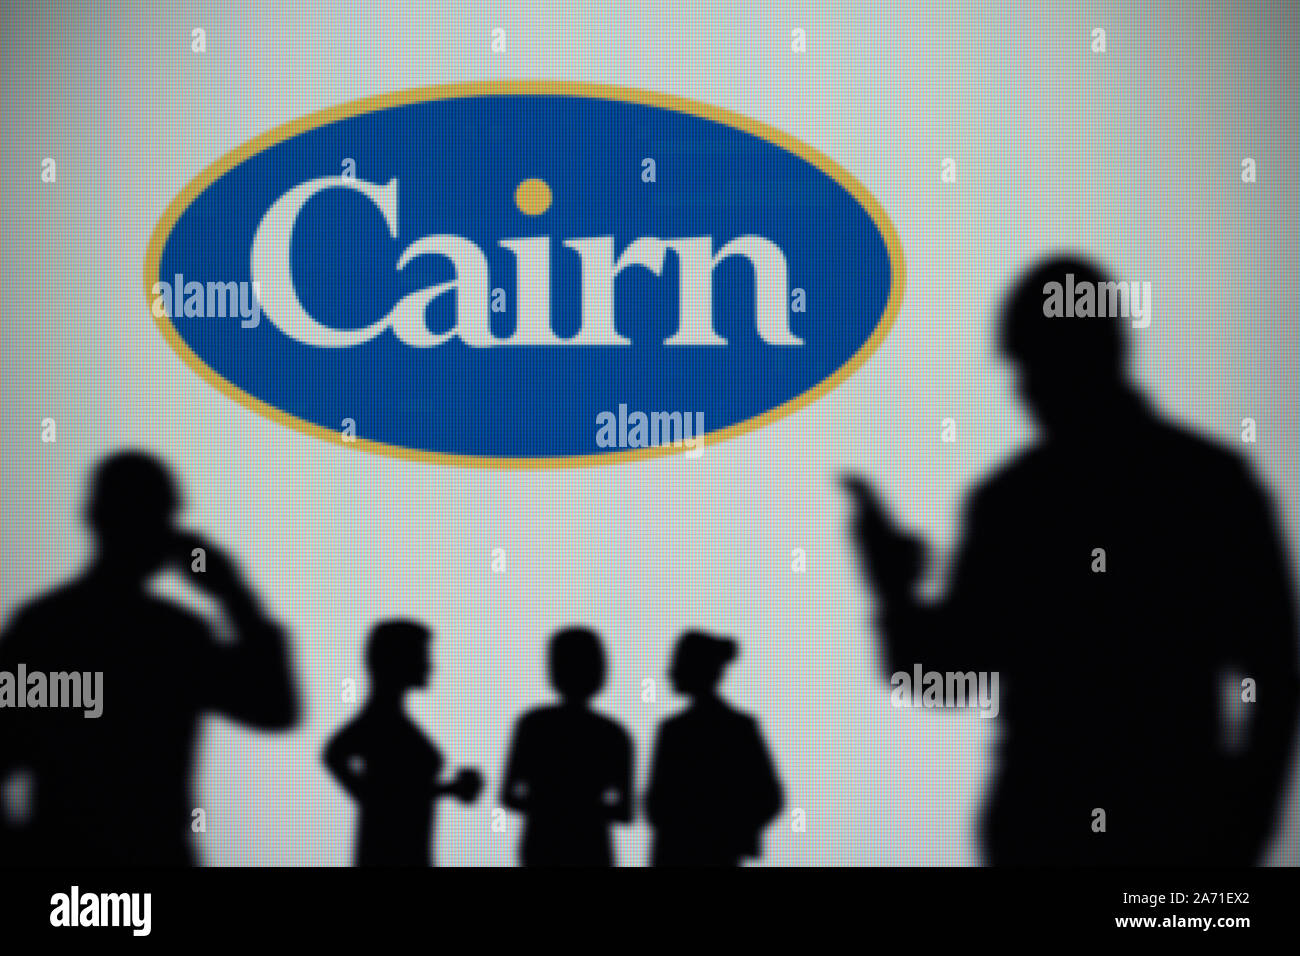 The Cairn Energy logo is seen on an LED screen in the background while a silhouetted person uses a smartphone (Editorial use only) Stock Photo